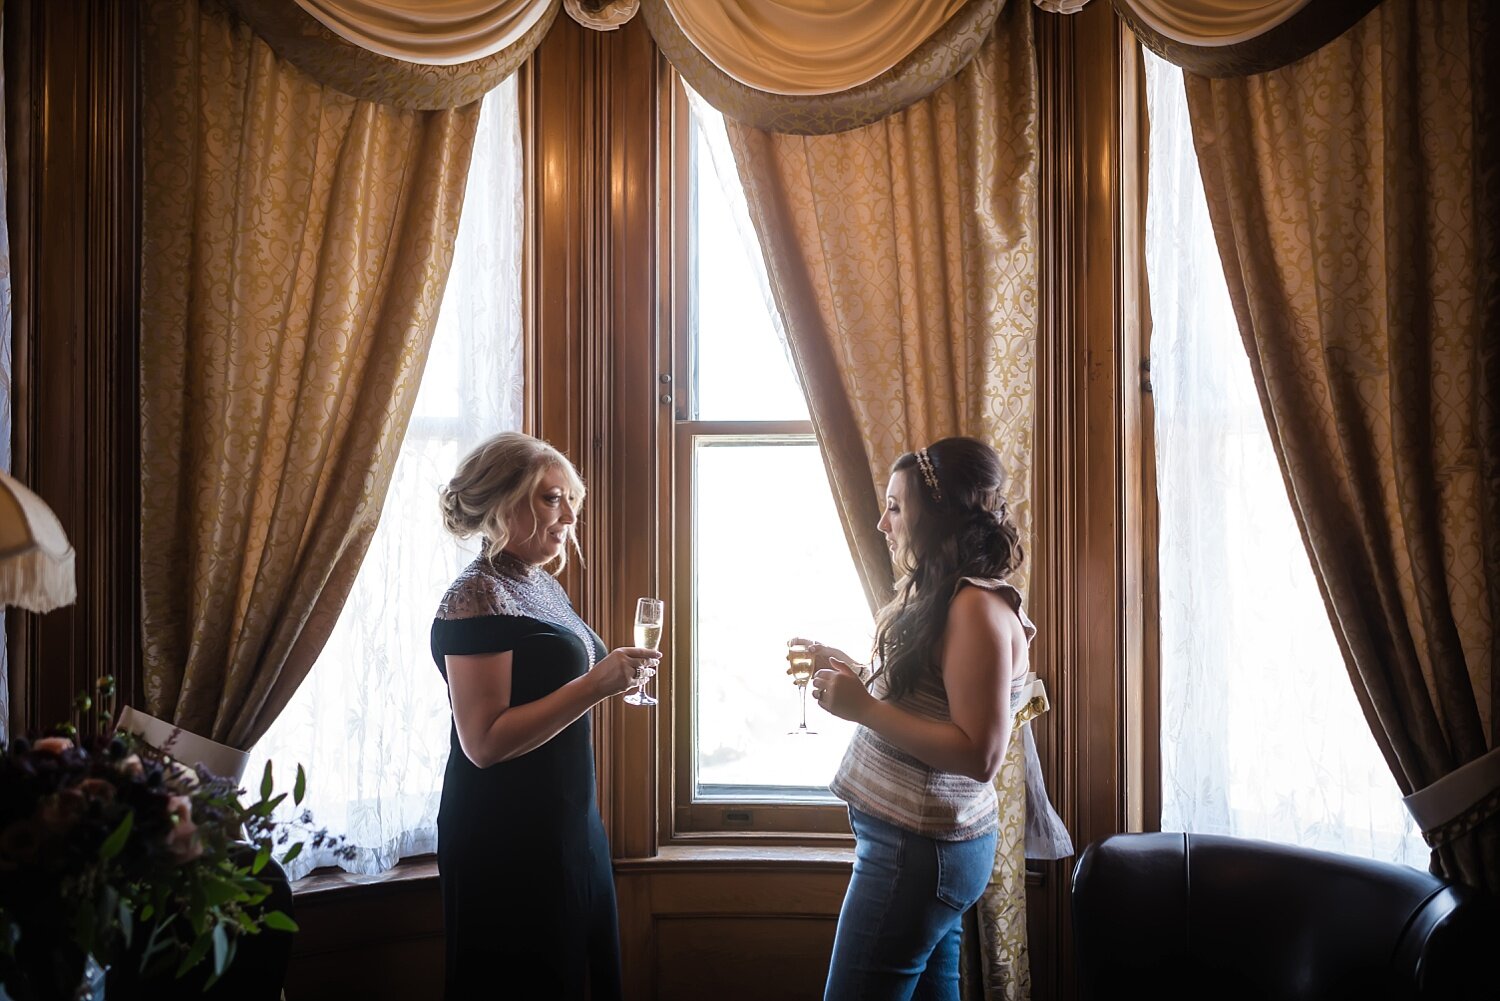  A bride and her mom share a toast in front of a large historic window before the bride gets dressed.  